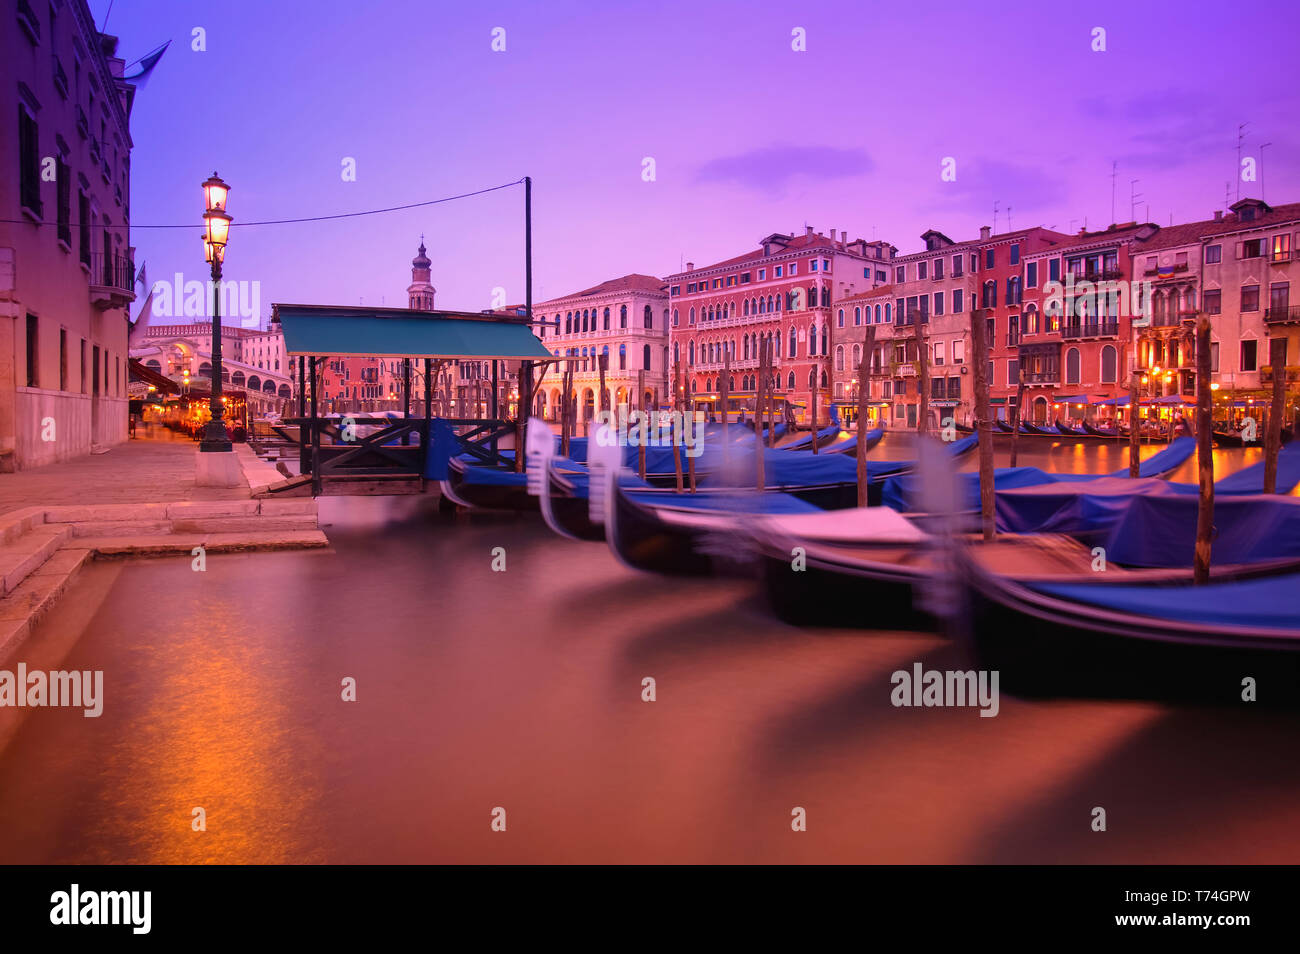 Gondolas moored along the shoreline of the Grand Canal during a vibrant sunset; Venice, Italy Stock Photo